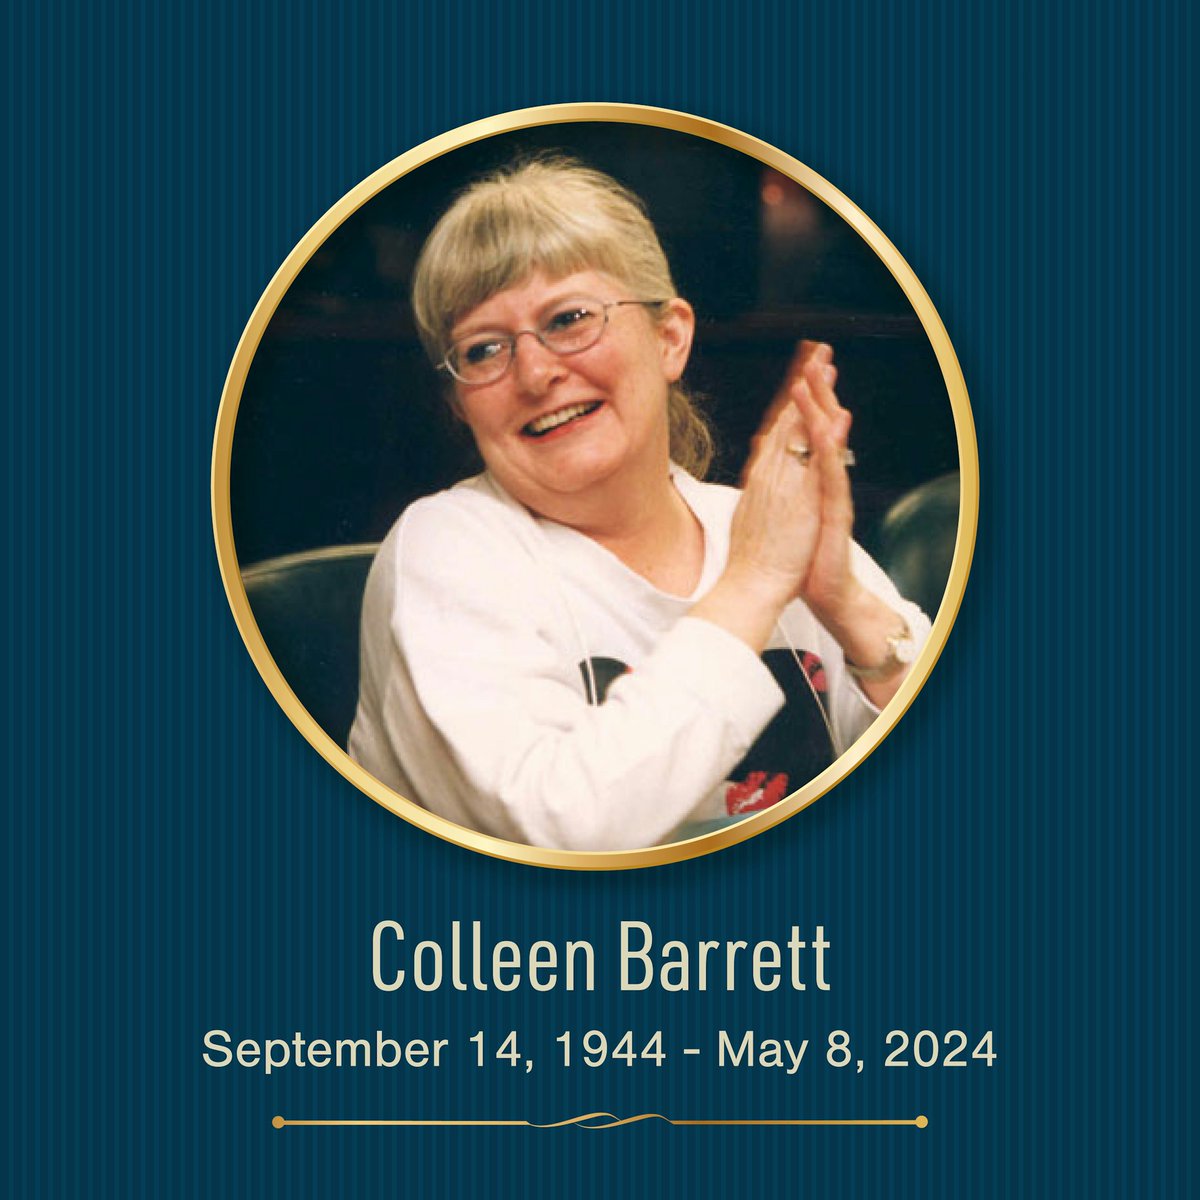 Colleen Barrett was the “heart and soul” of Southwest Airlines who left behind a legacy of service. She will be deeply missed.